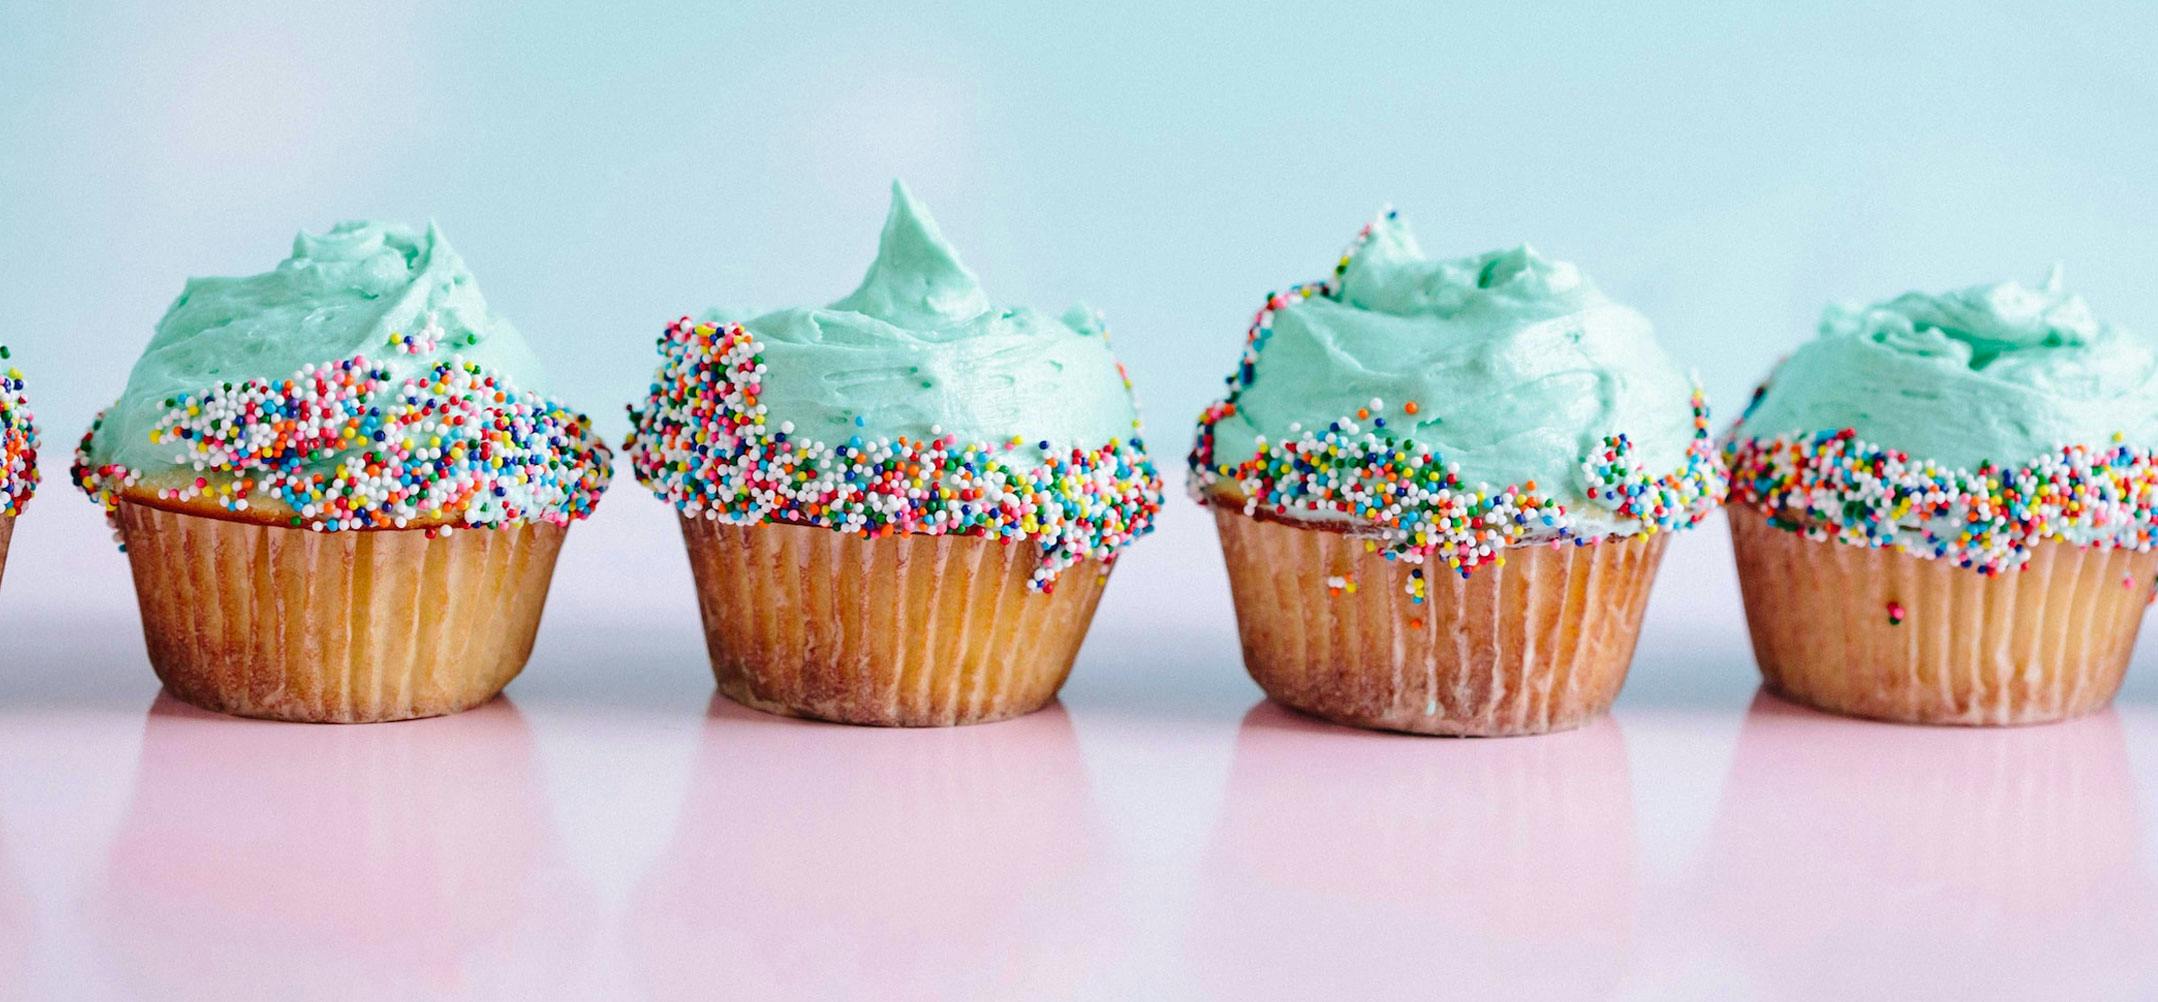 Cupcakes with turquoise icing and rainbow sprinkles.